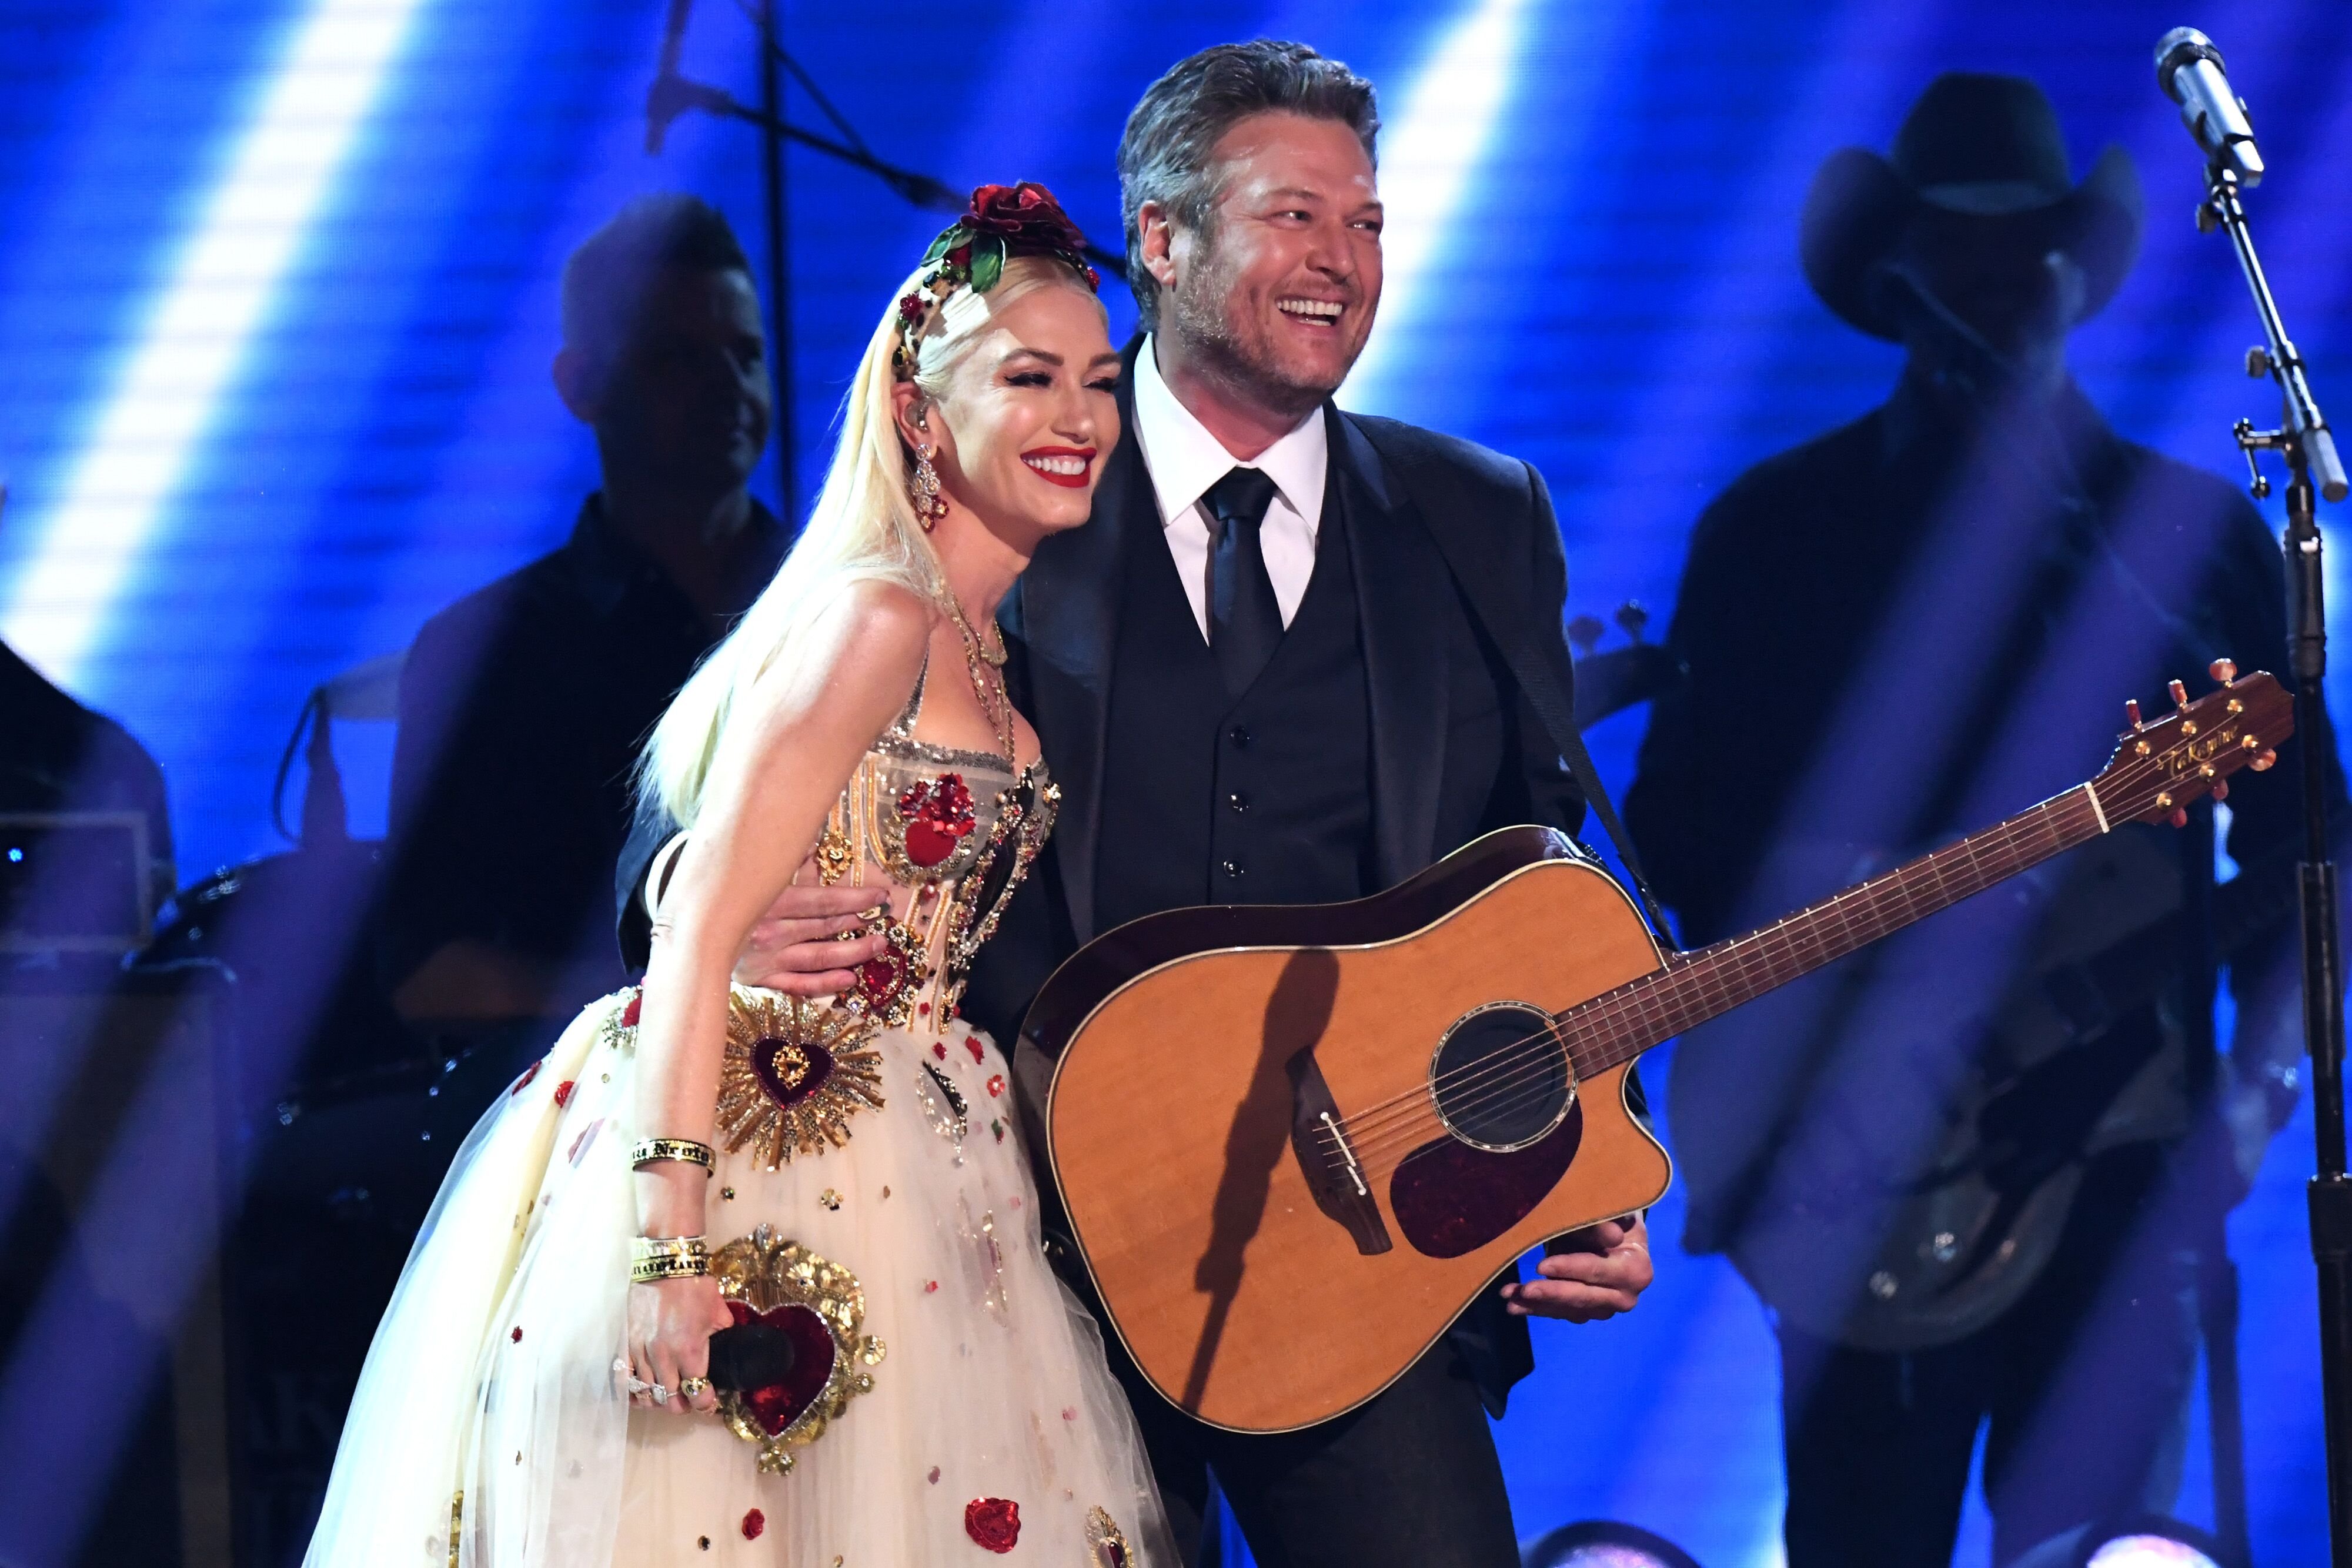 Gwen Stefani and Blake Shelton onstage during the 62nd Annual GRAMMY Awards at Staples Center on January 26, 2020, in Los Angeles, California | Photo: Jeff Kravitz/Getty Images